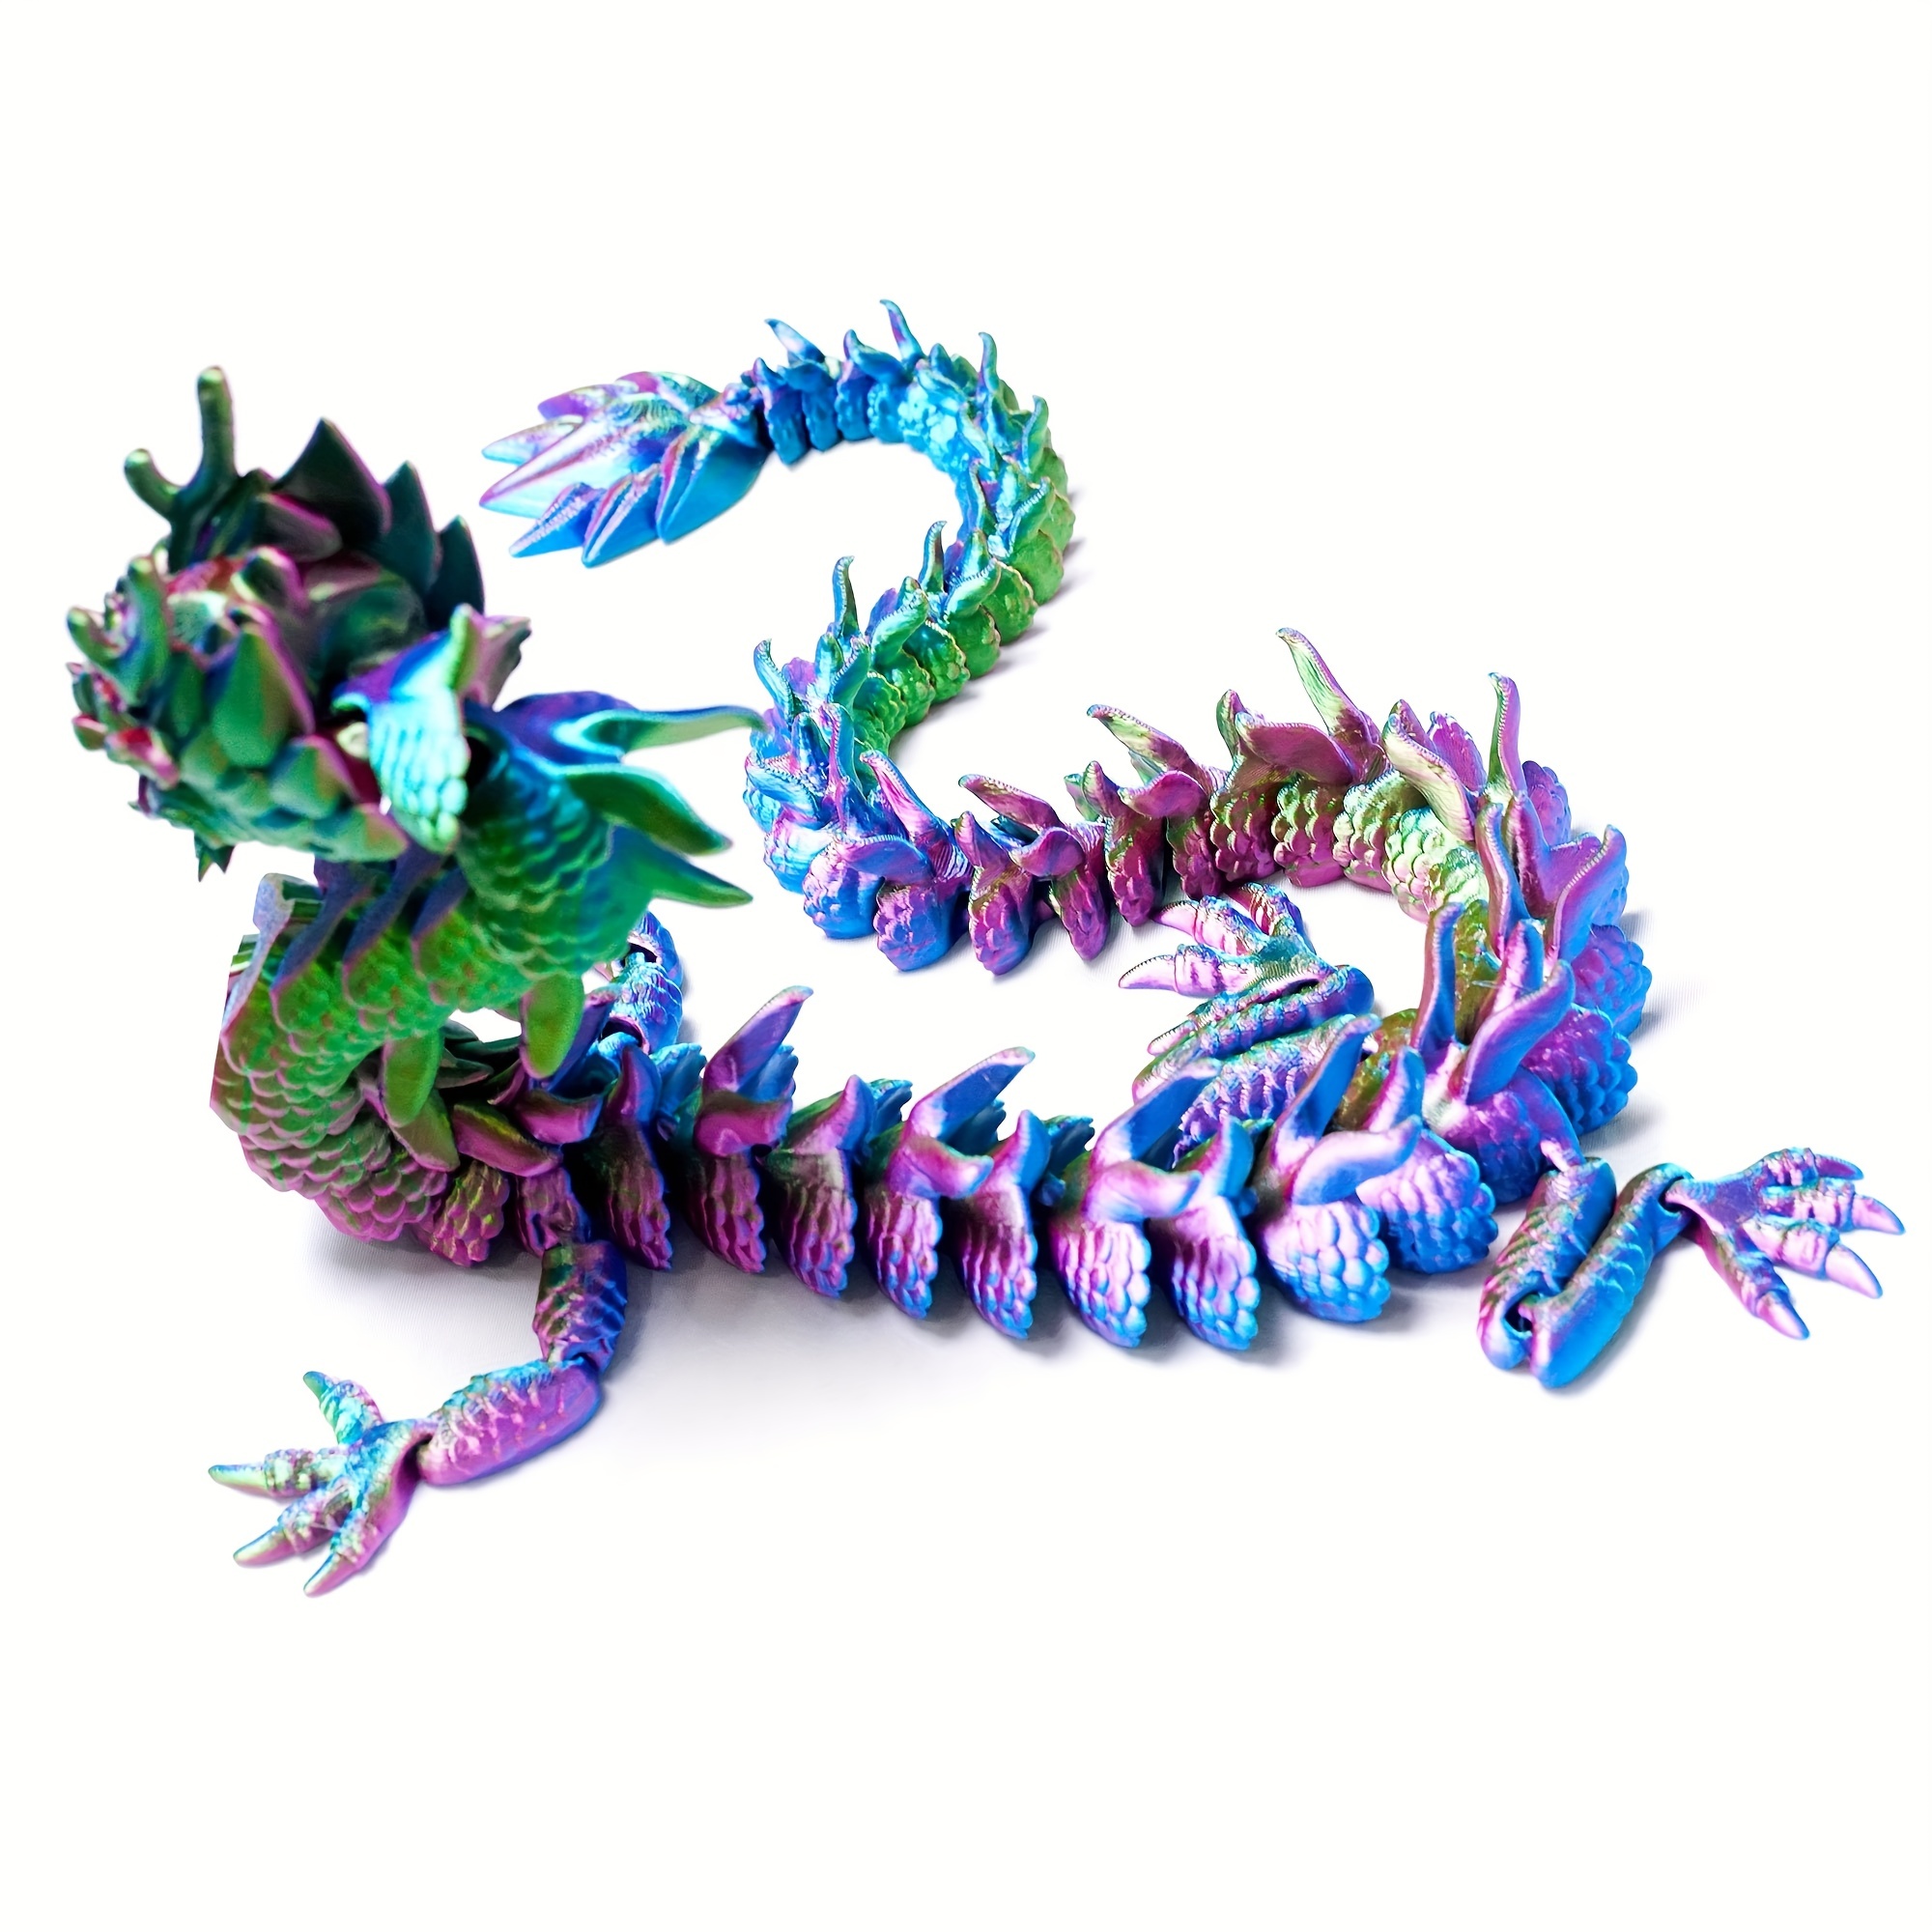 3D Printed Dragon Toys, Relief Anxiety Crystal Dragon Figure with Rotatable  Joints, 3D Printed Dragon Action Figures/ Articulated Dragon Gifts for